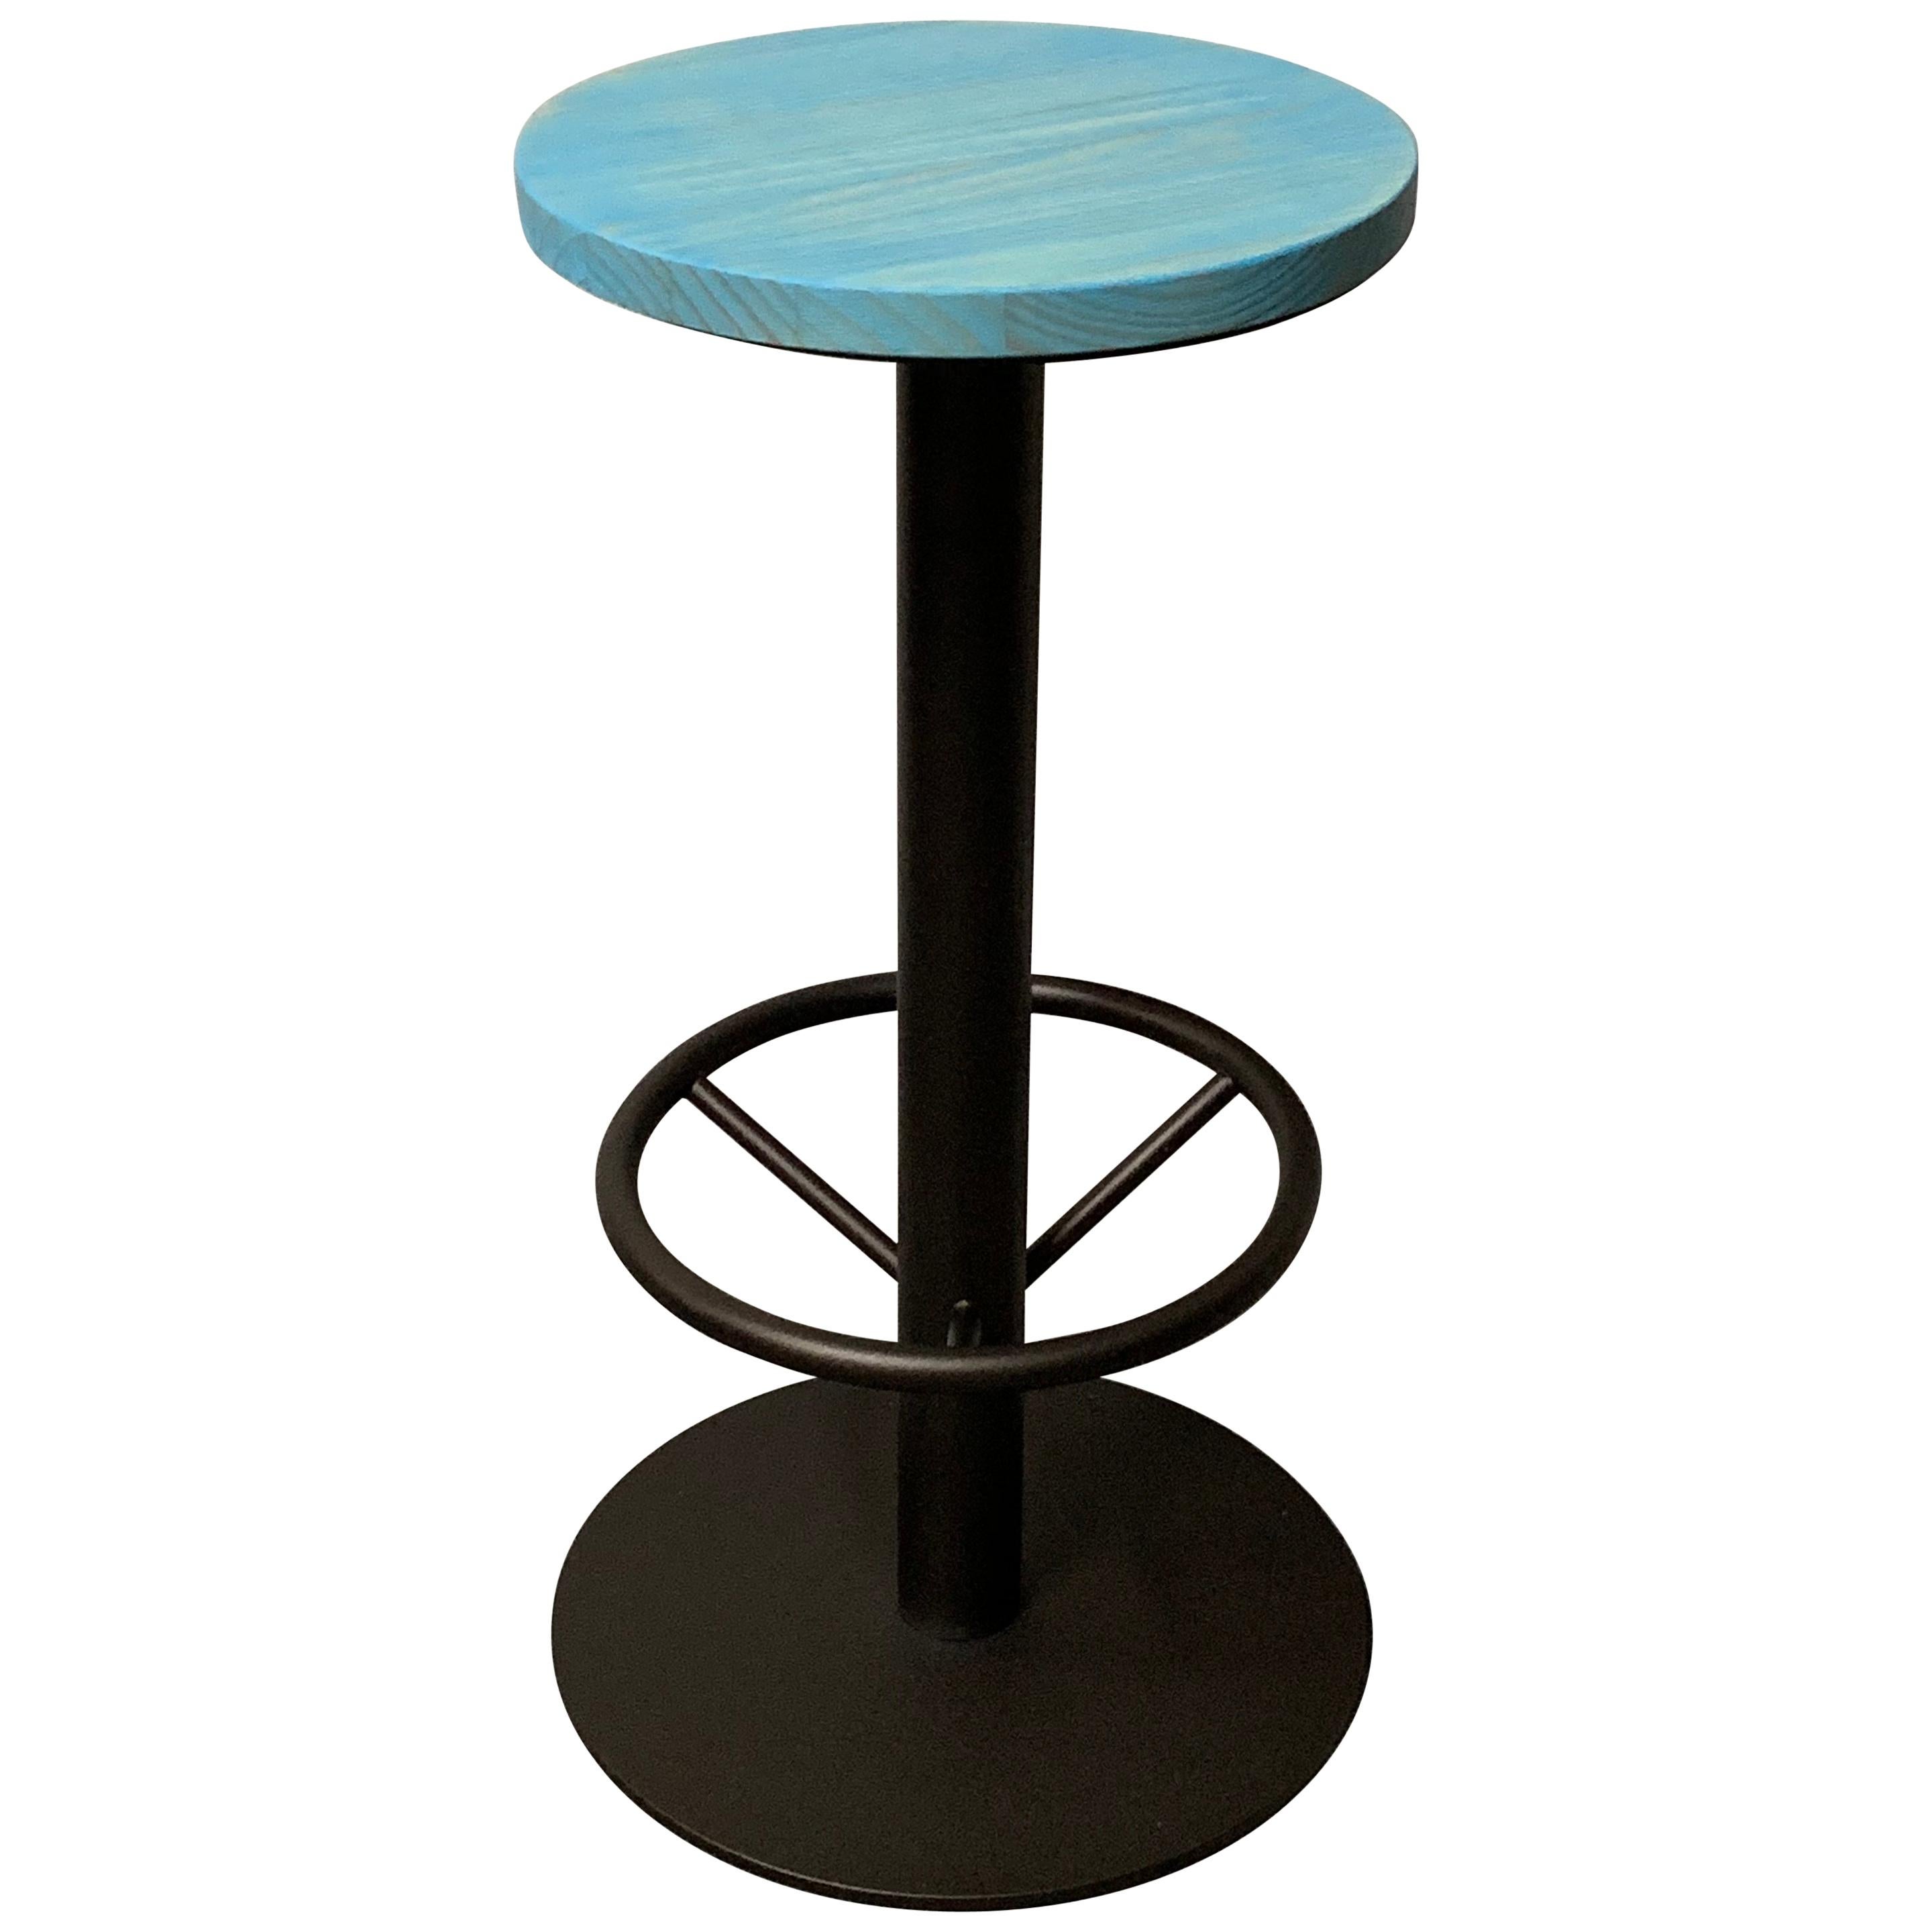 New Industrial Wrought Iron Shop Stool with Turquoise Wood Seat